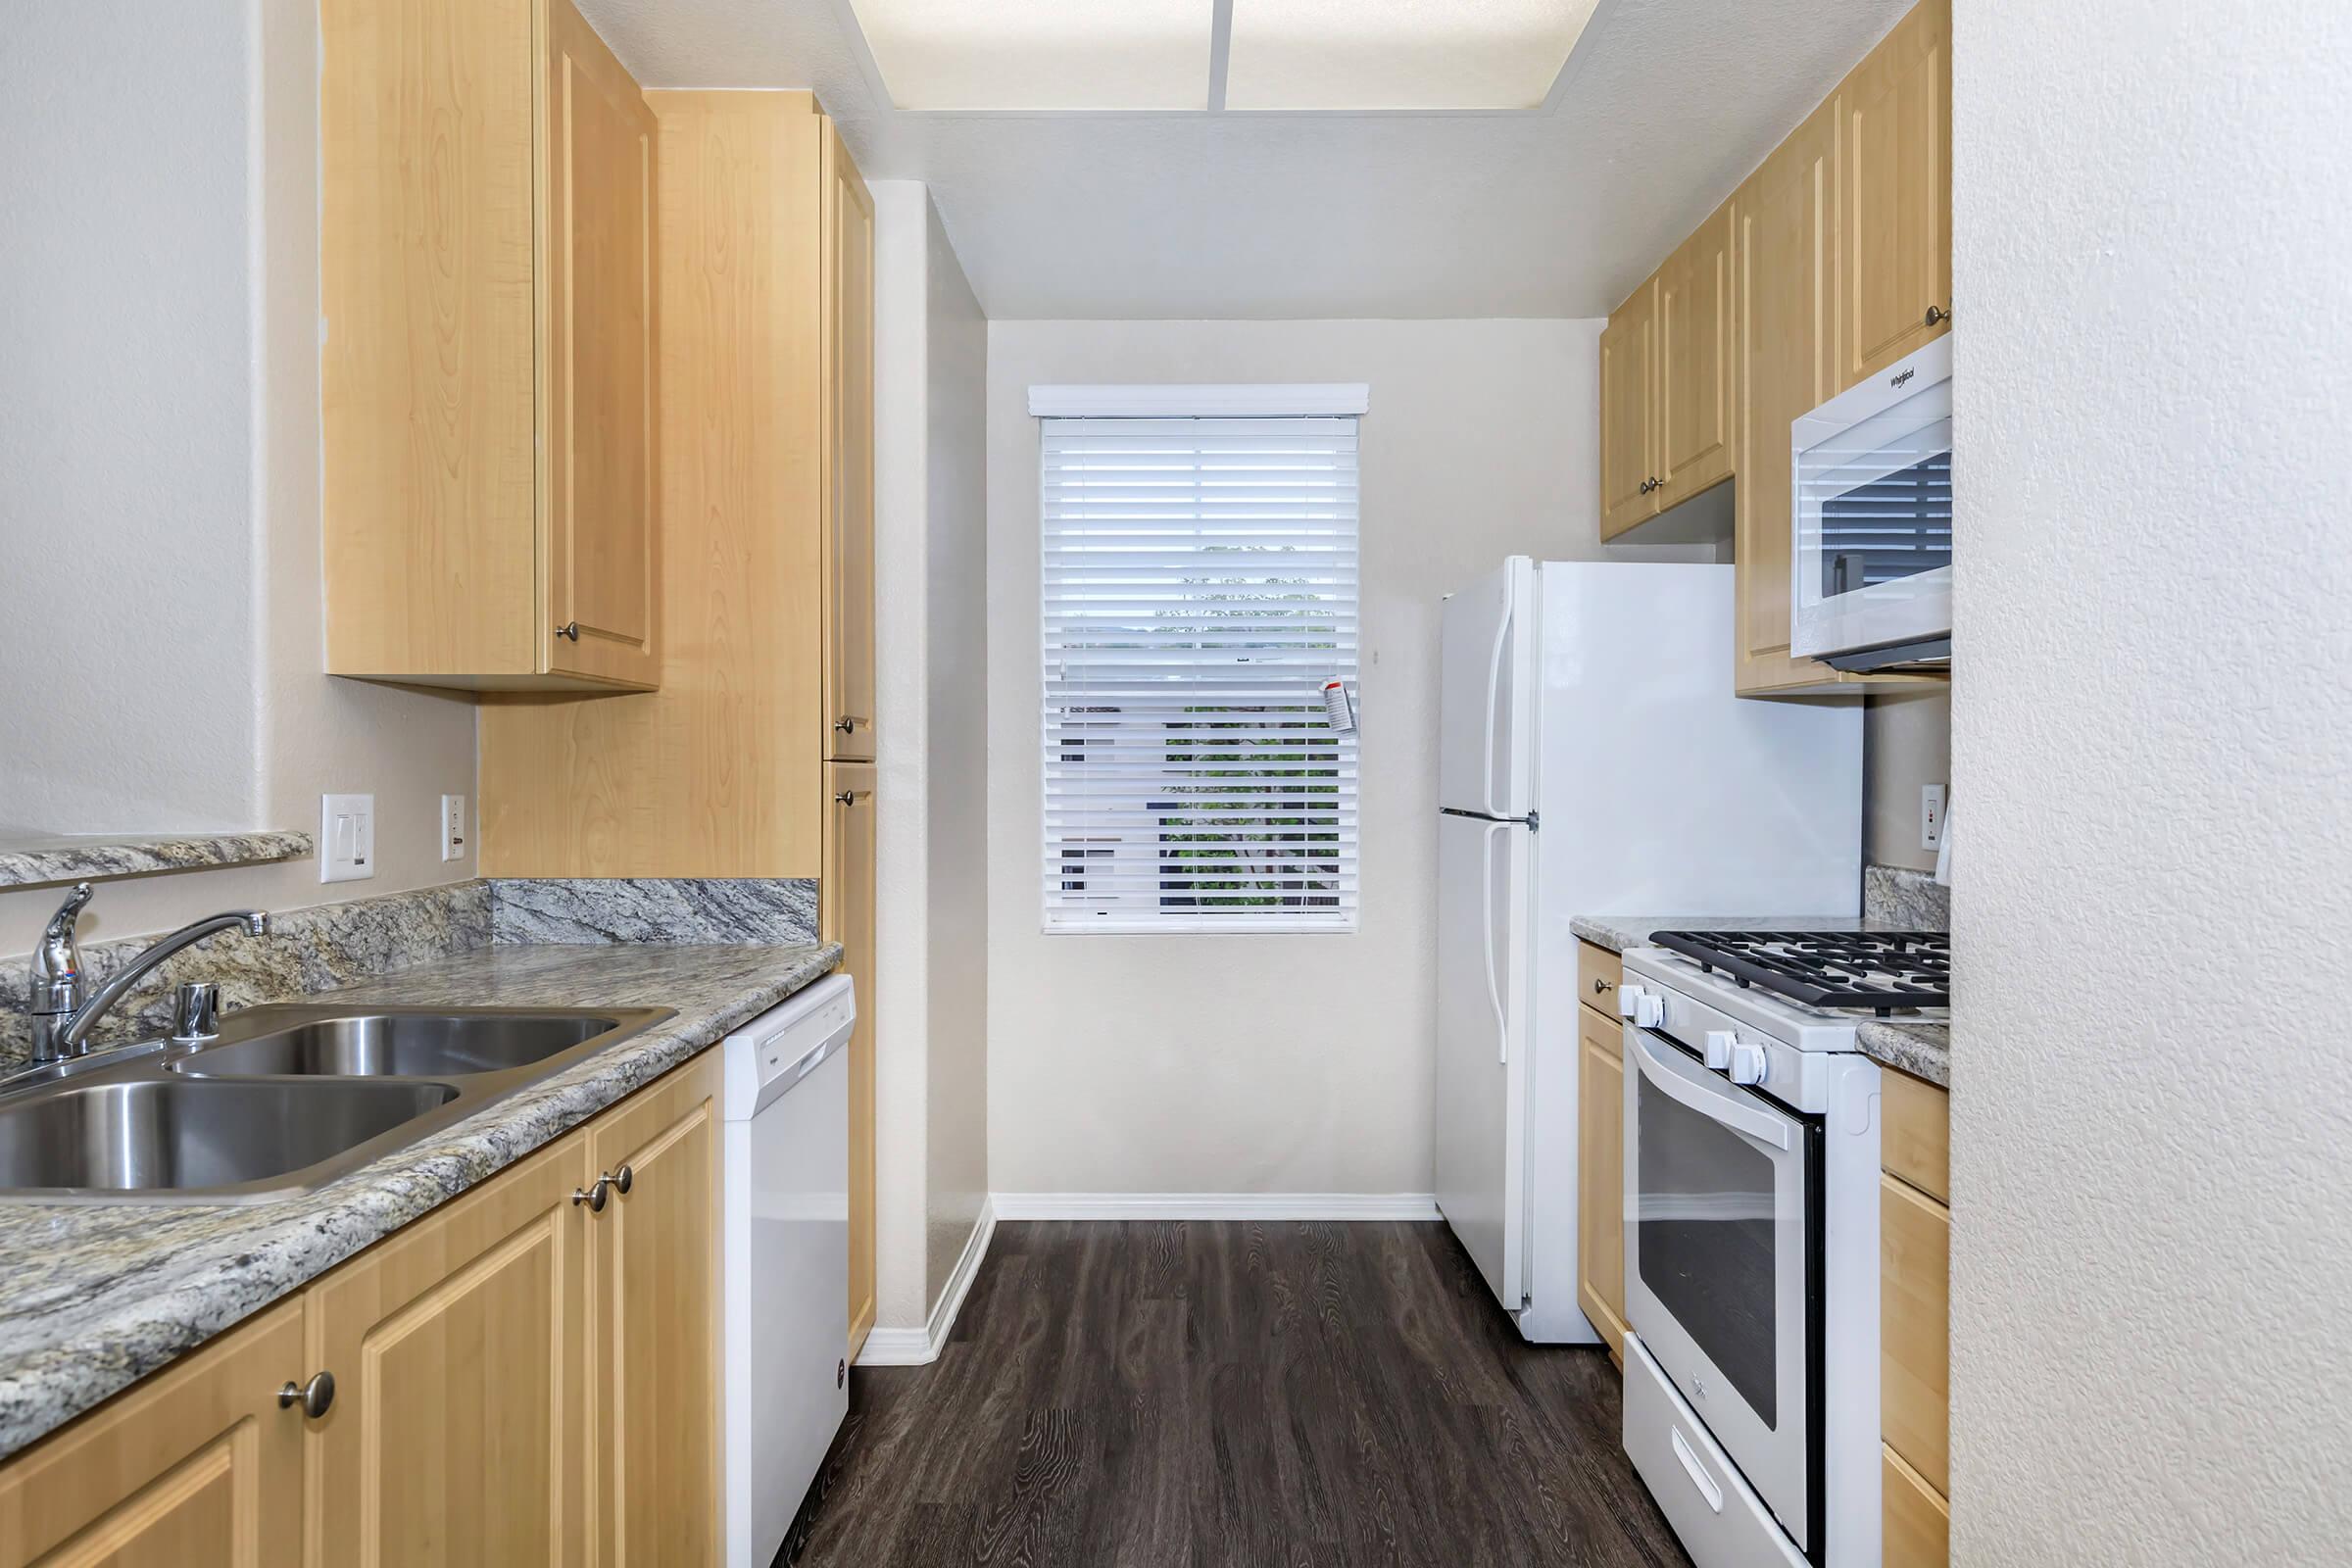 Fully equipped kitchen at Laurel Glen Apartment Homes